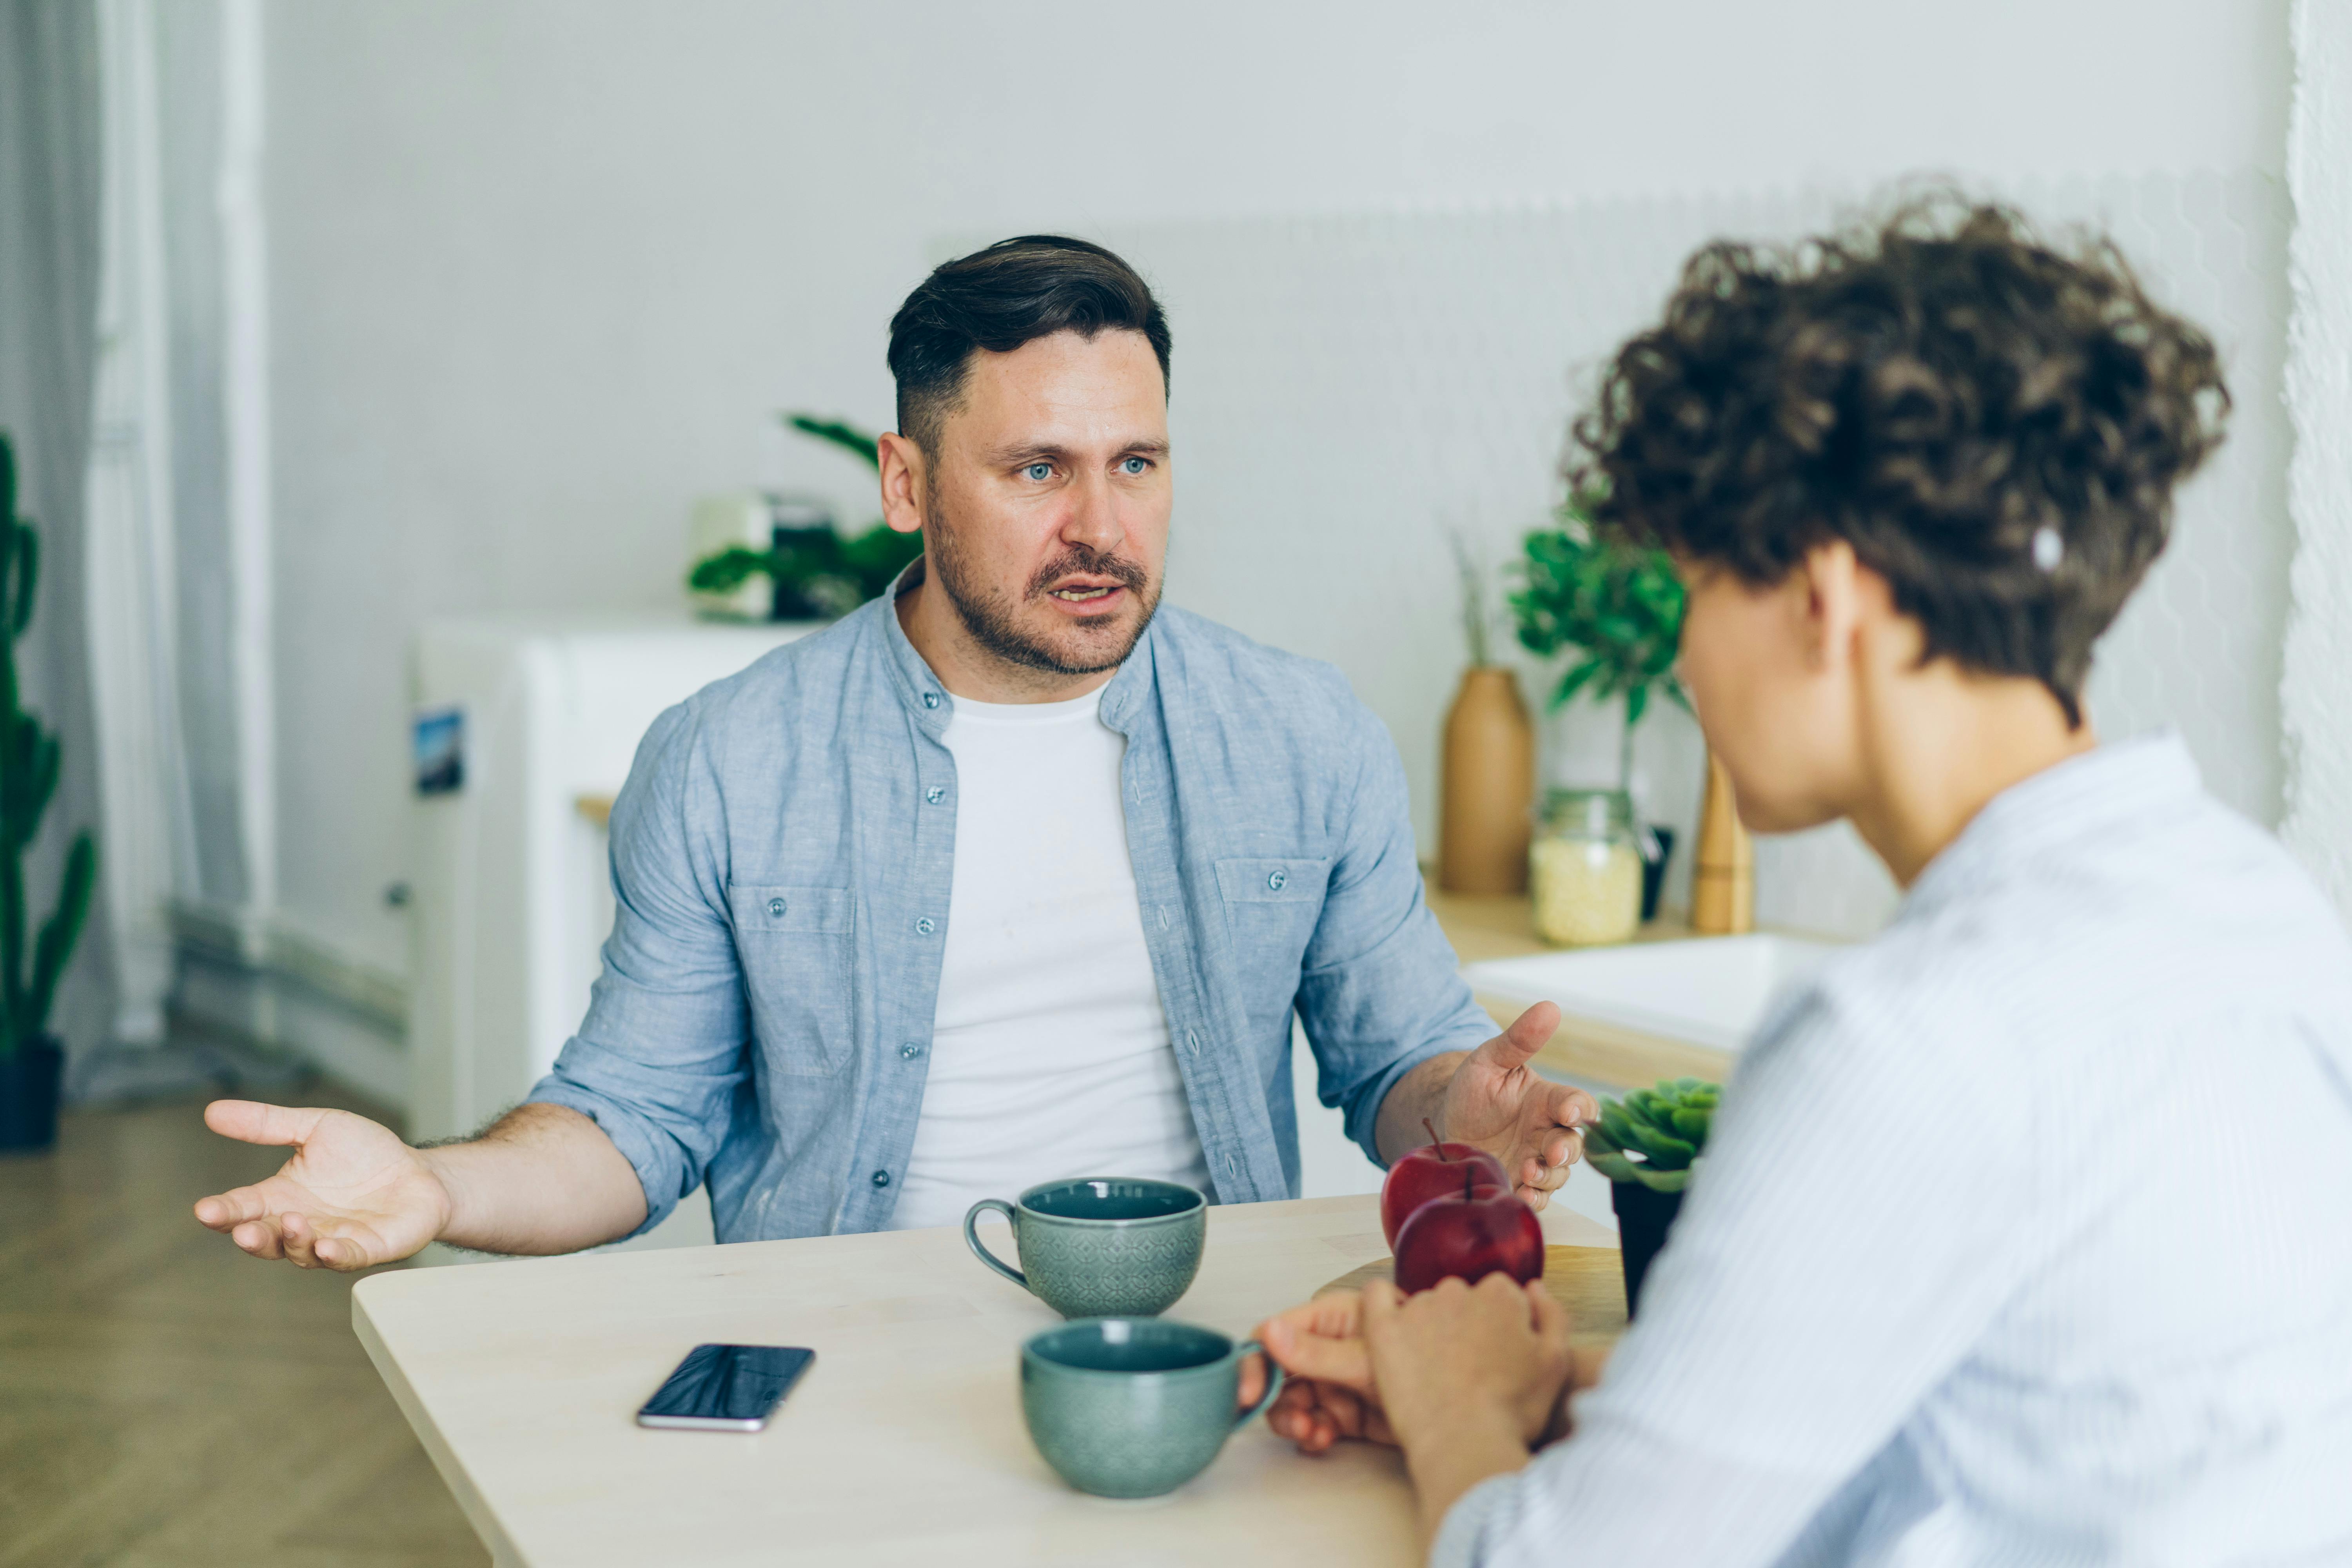 Couple argues during breakfast | Source: Pexels